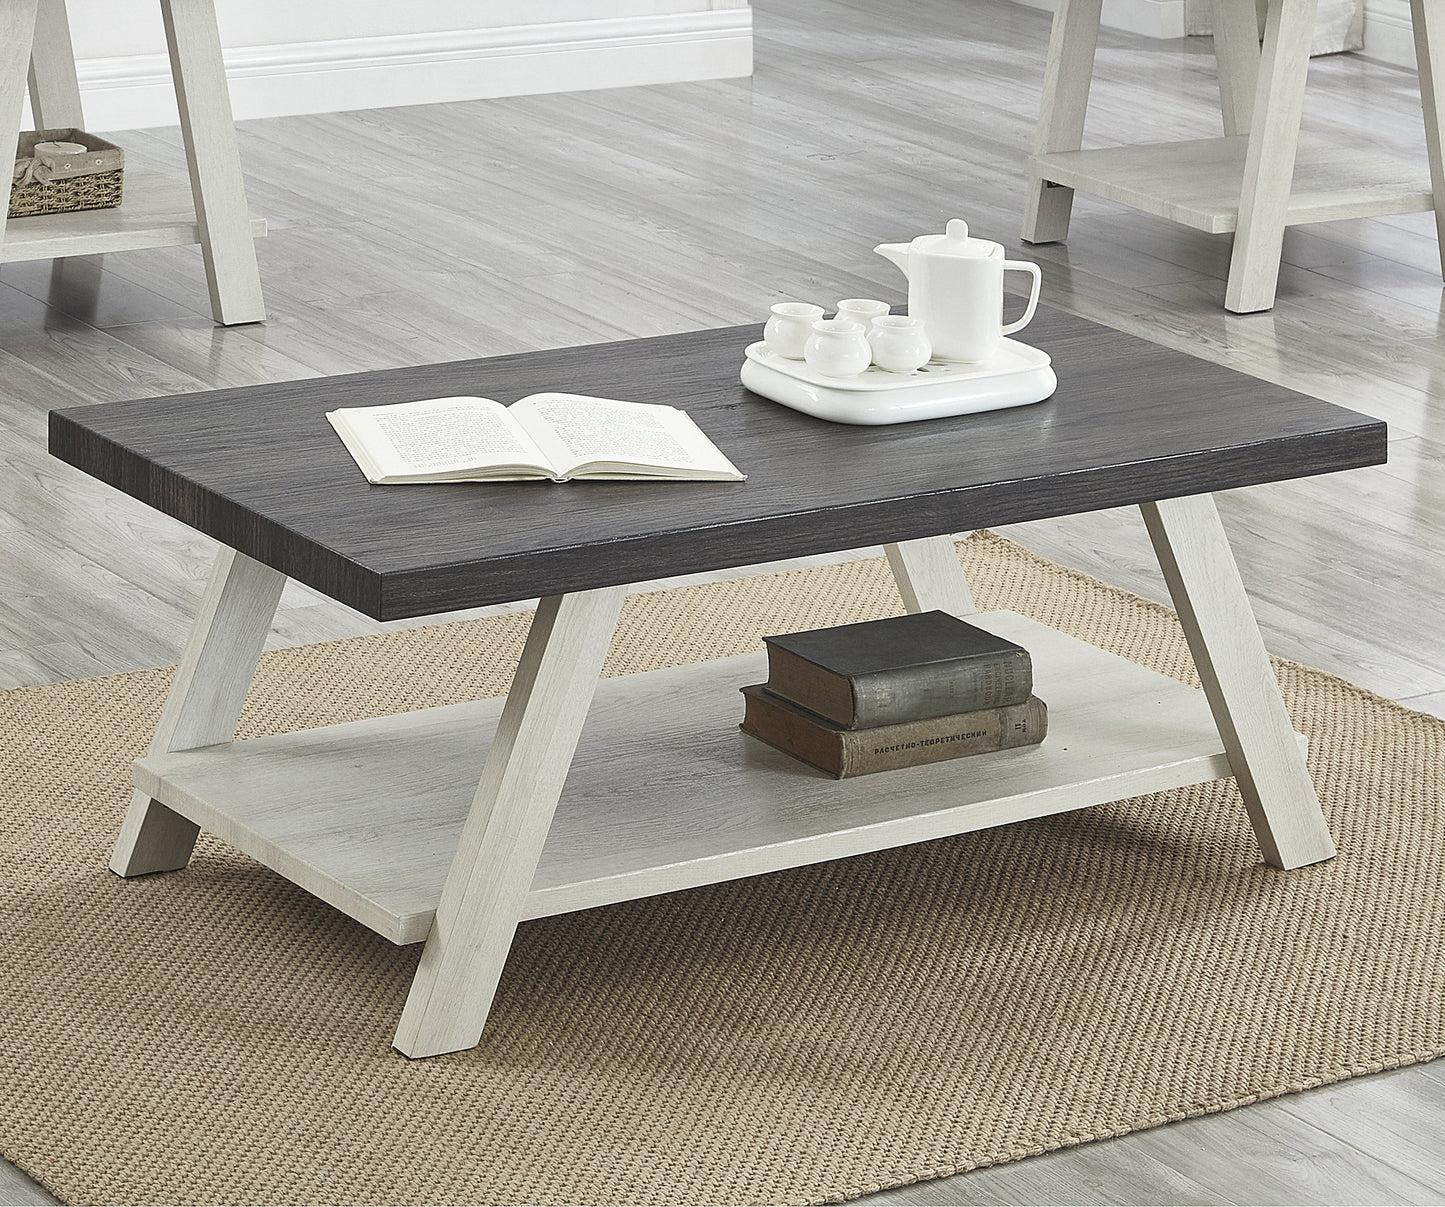 Athens Contemporary Two-Tone Wood Shelf Coffee Table in Weathered Charcoal and Beige